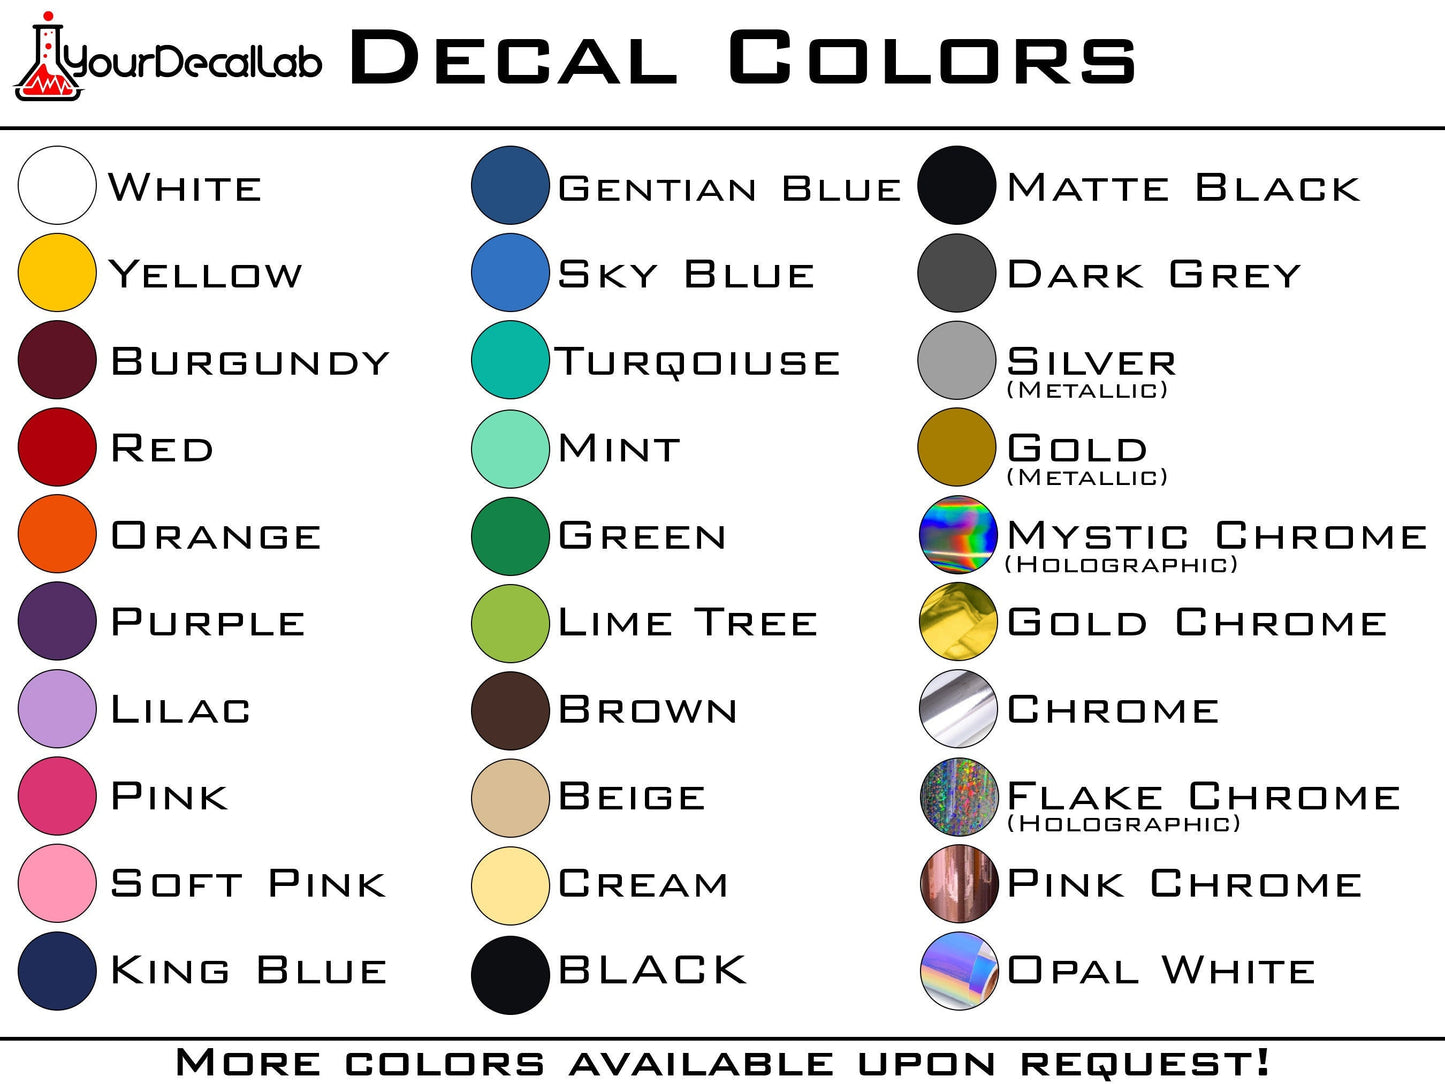 Daily Grind Decal - Many Colors & Sizes